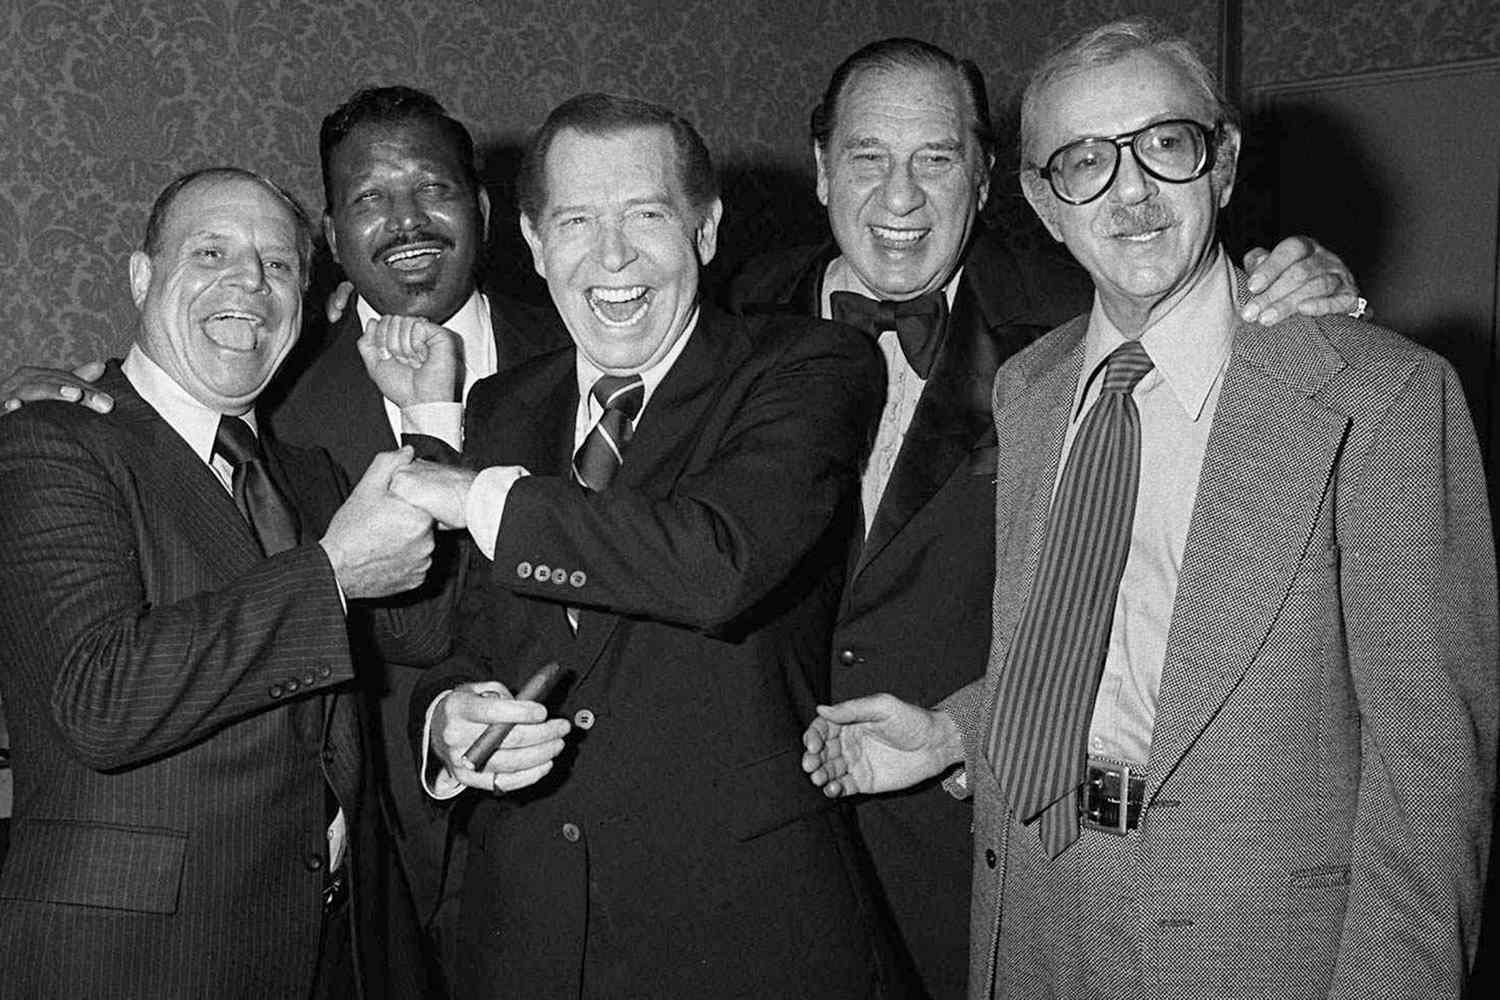 Don Rickles With Henny Youngman, Sugar Ray, Milton Berle, and Jack Albertson in Beverly Hills&nbsp;on November 17, 1978